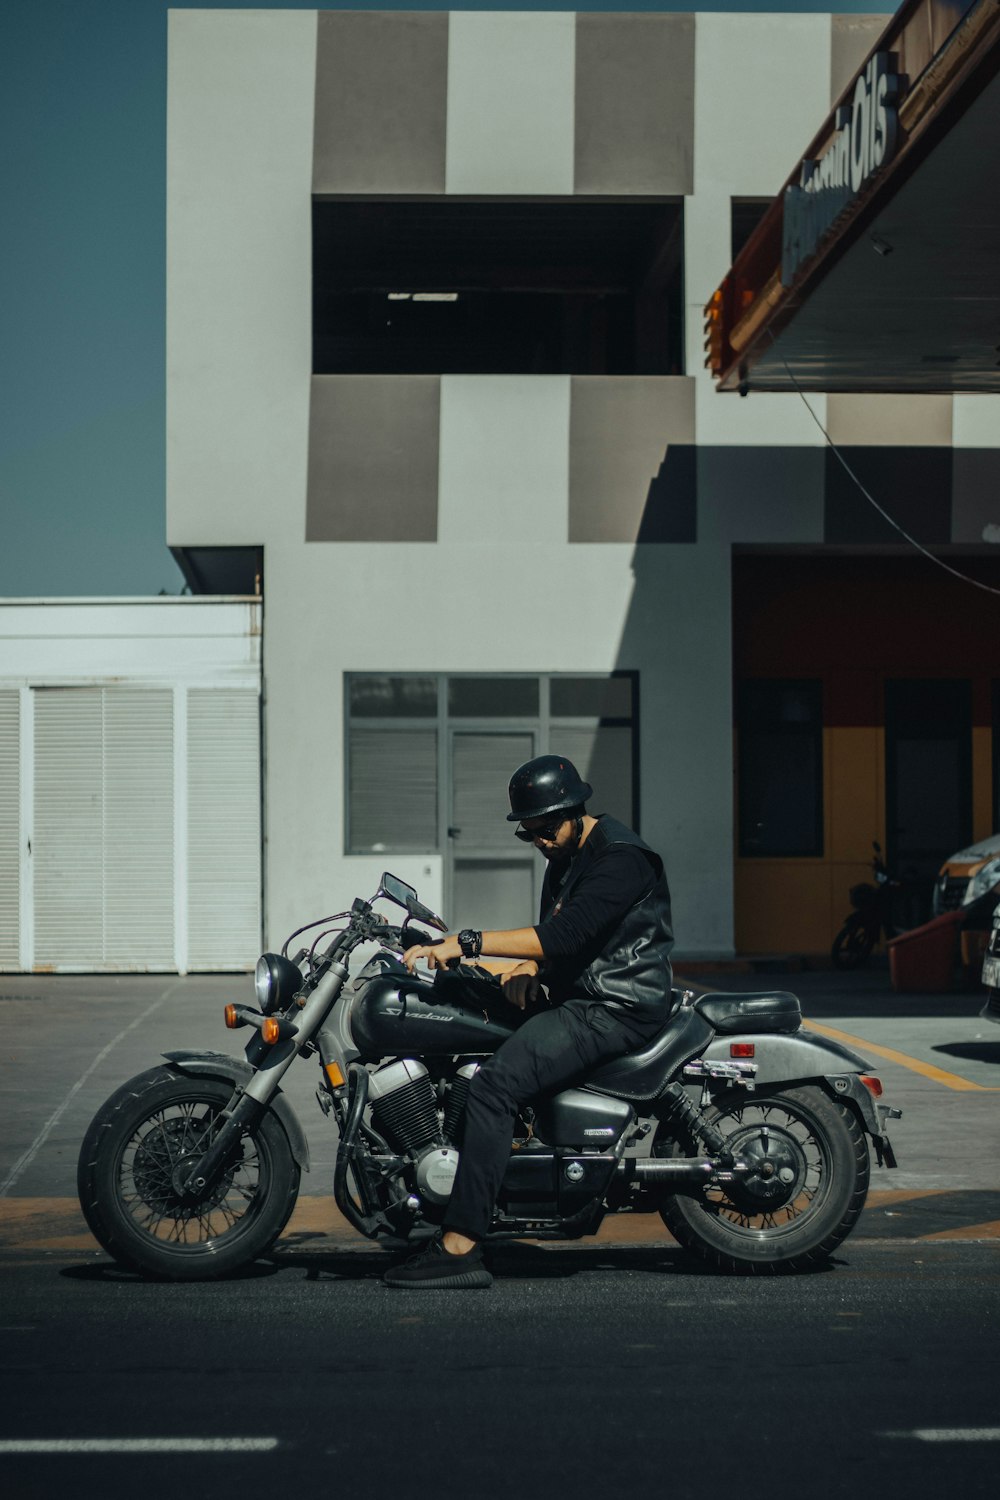 a man sitting on a motorcycle in a parking lot